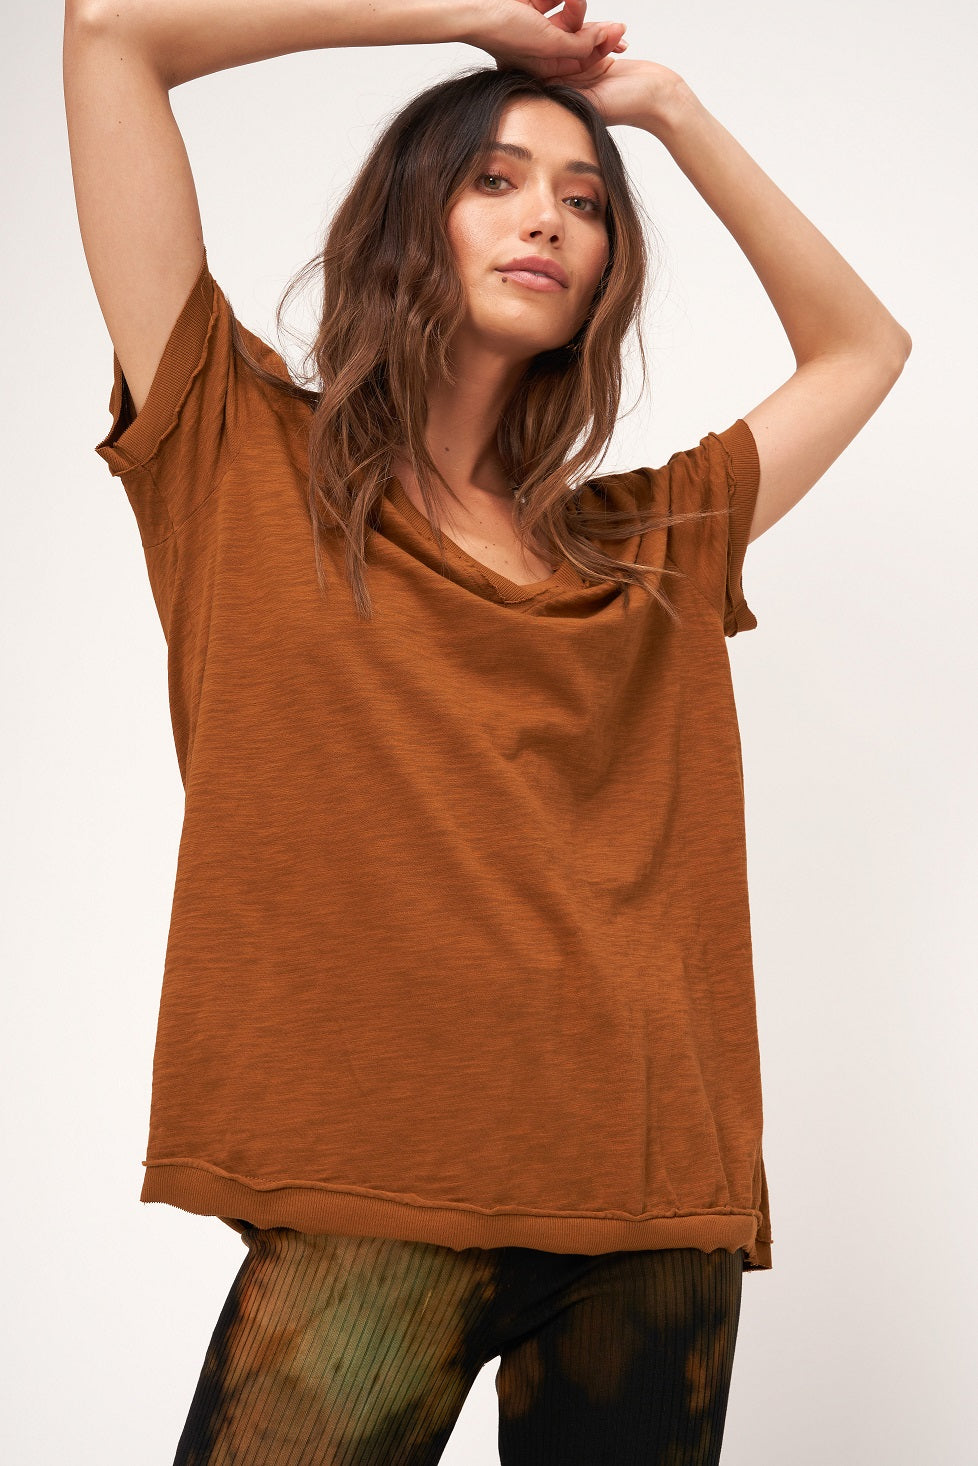 KNOCK OUT V NECK TEE - CINNAMON SPICE - Kingfisher Road - Online Boutique